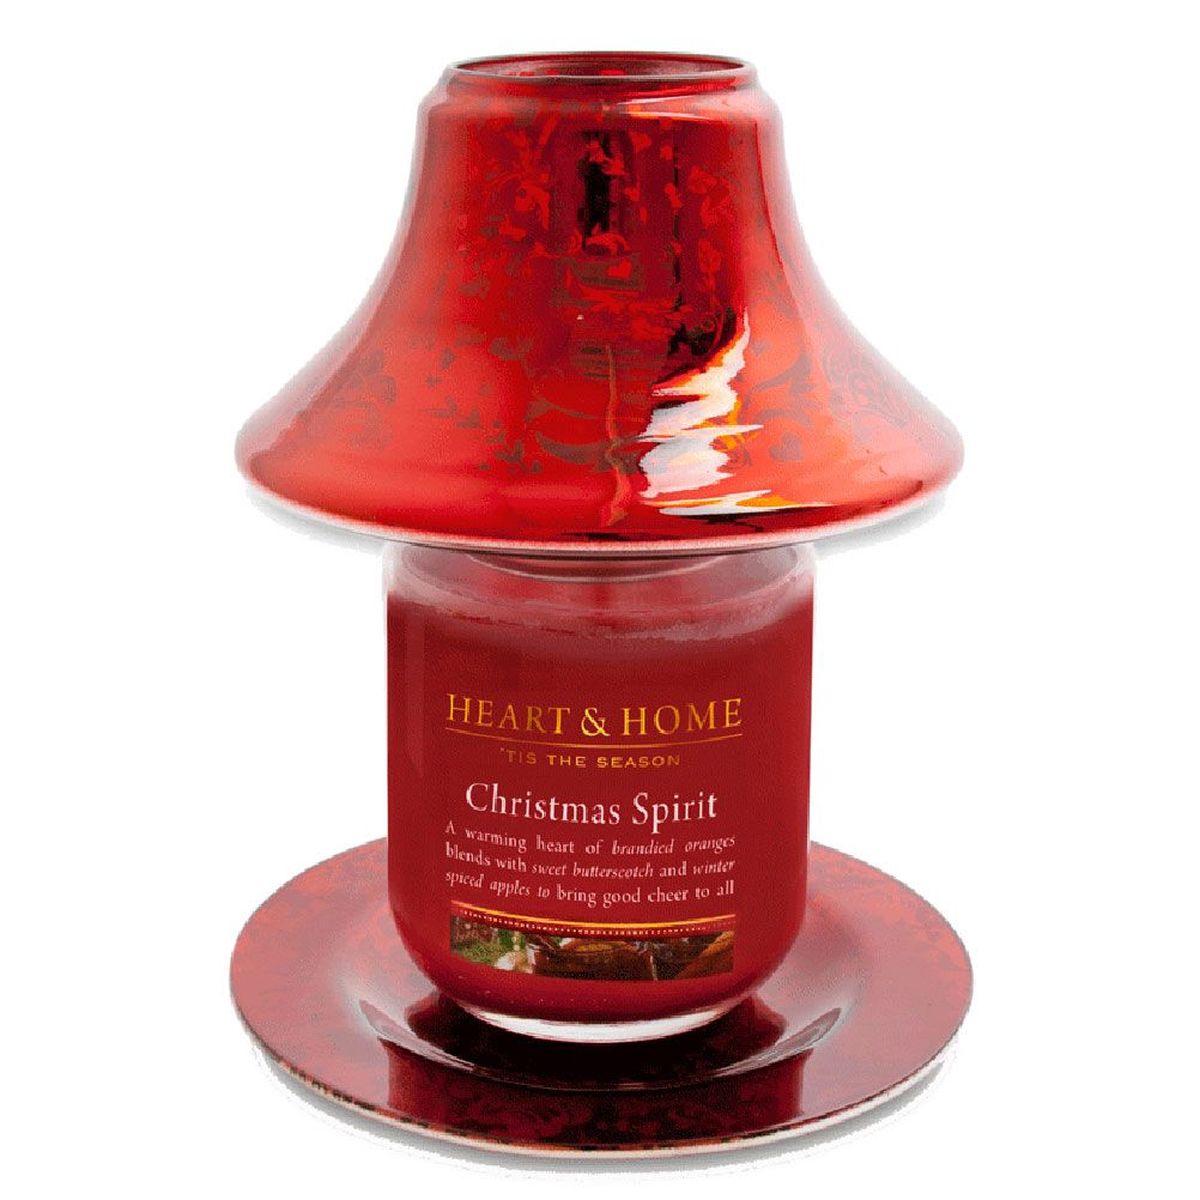 WINTER CANDLE SHADE  RED ANGEL